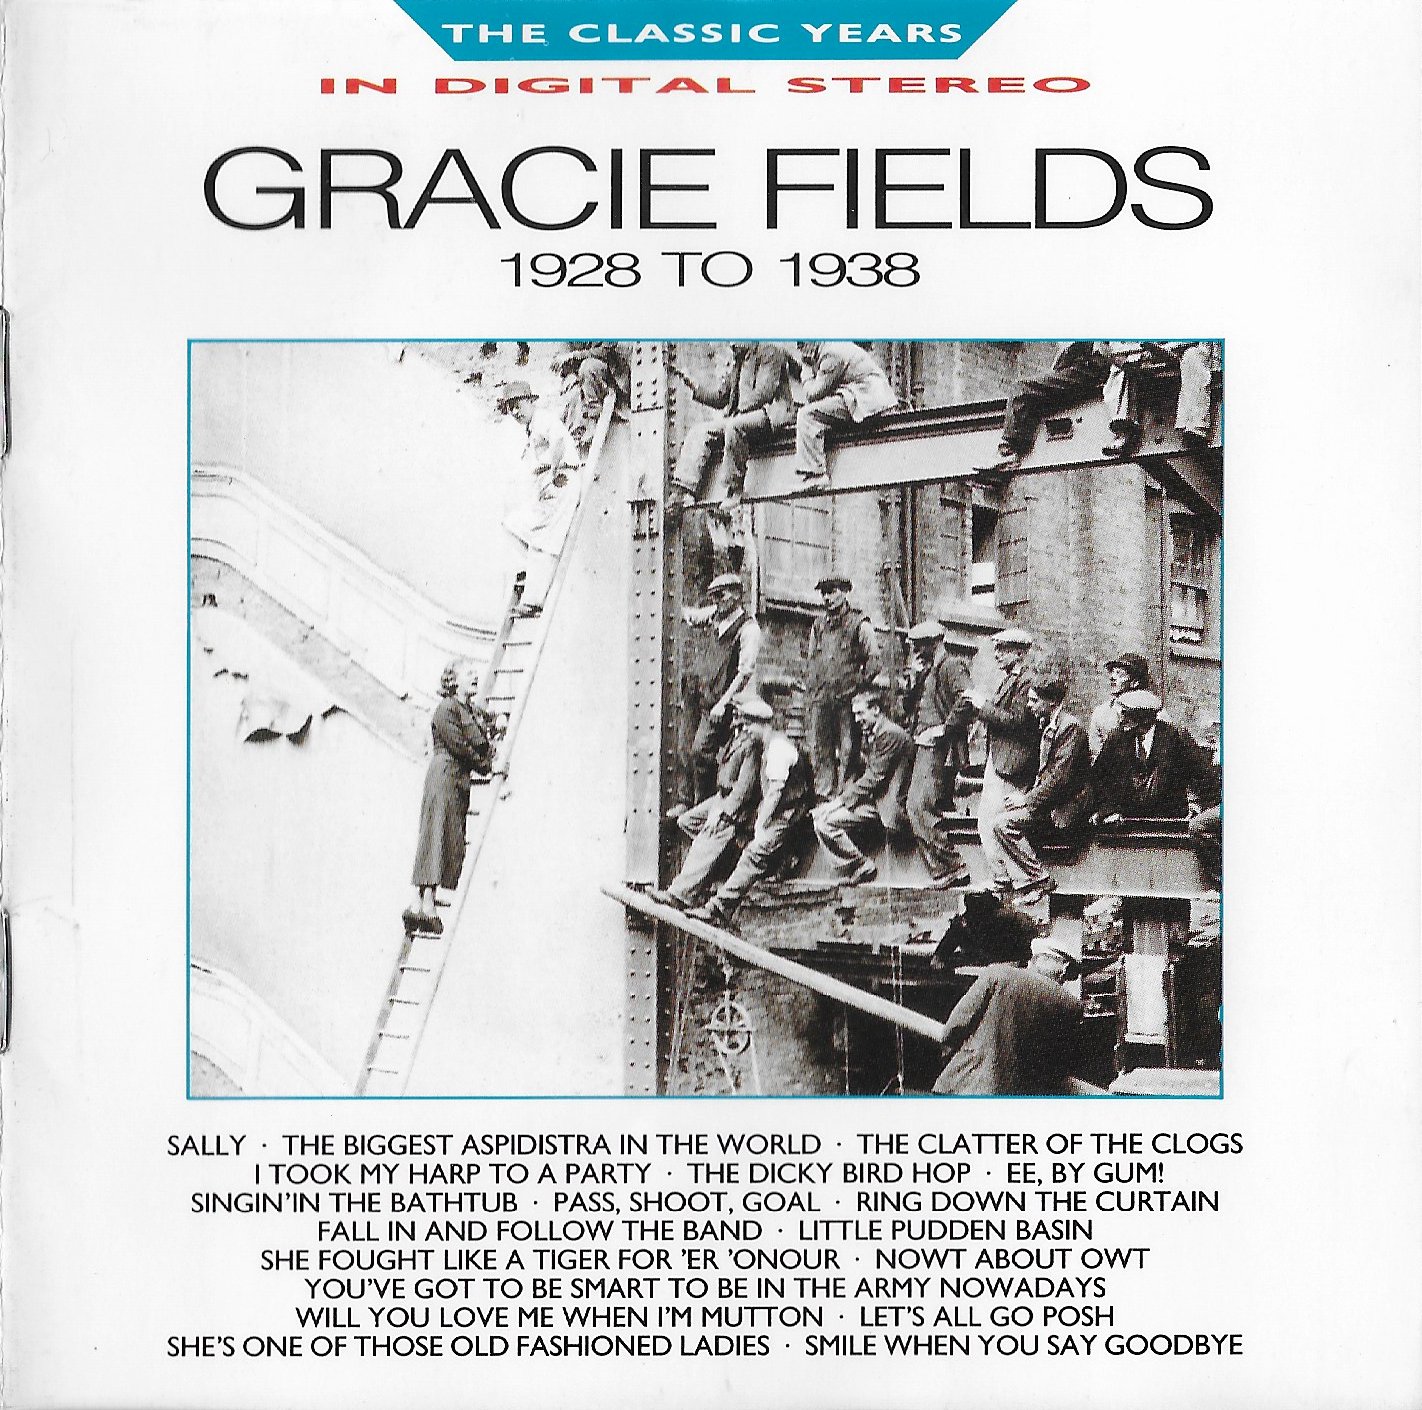 Picture of BBCCD690 Classic years - Gracie Fields 1928 - 1938 by artist Gracie Fields from the BBC cds - Records and Tapes library